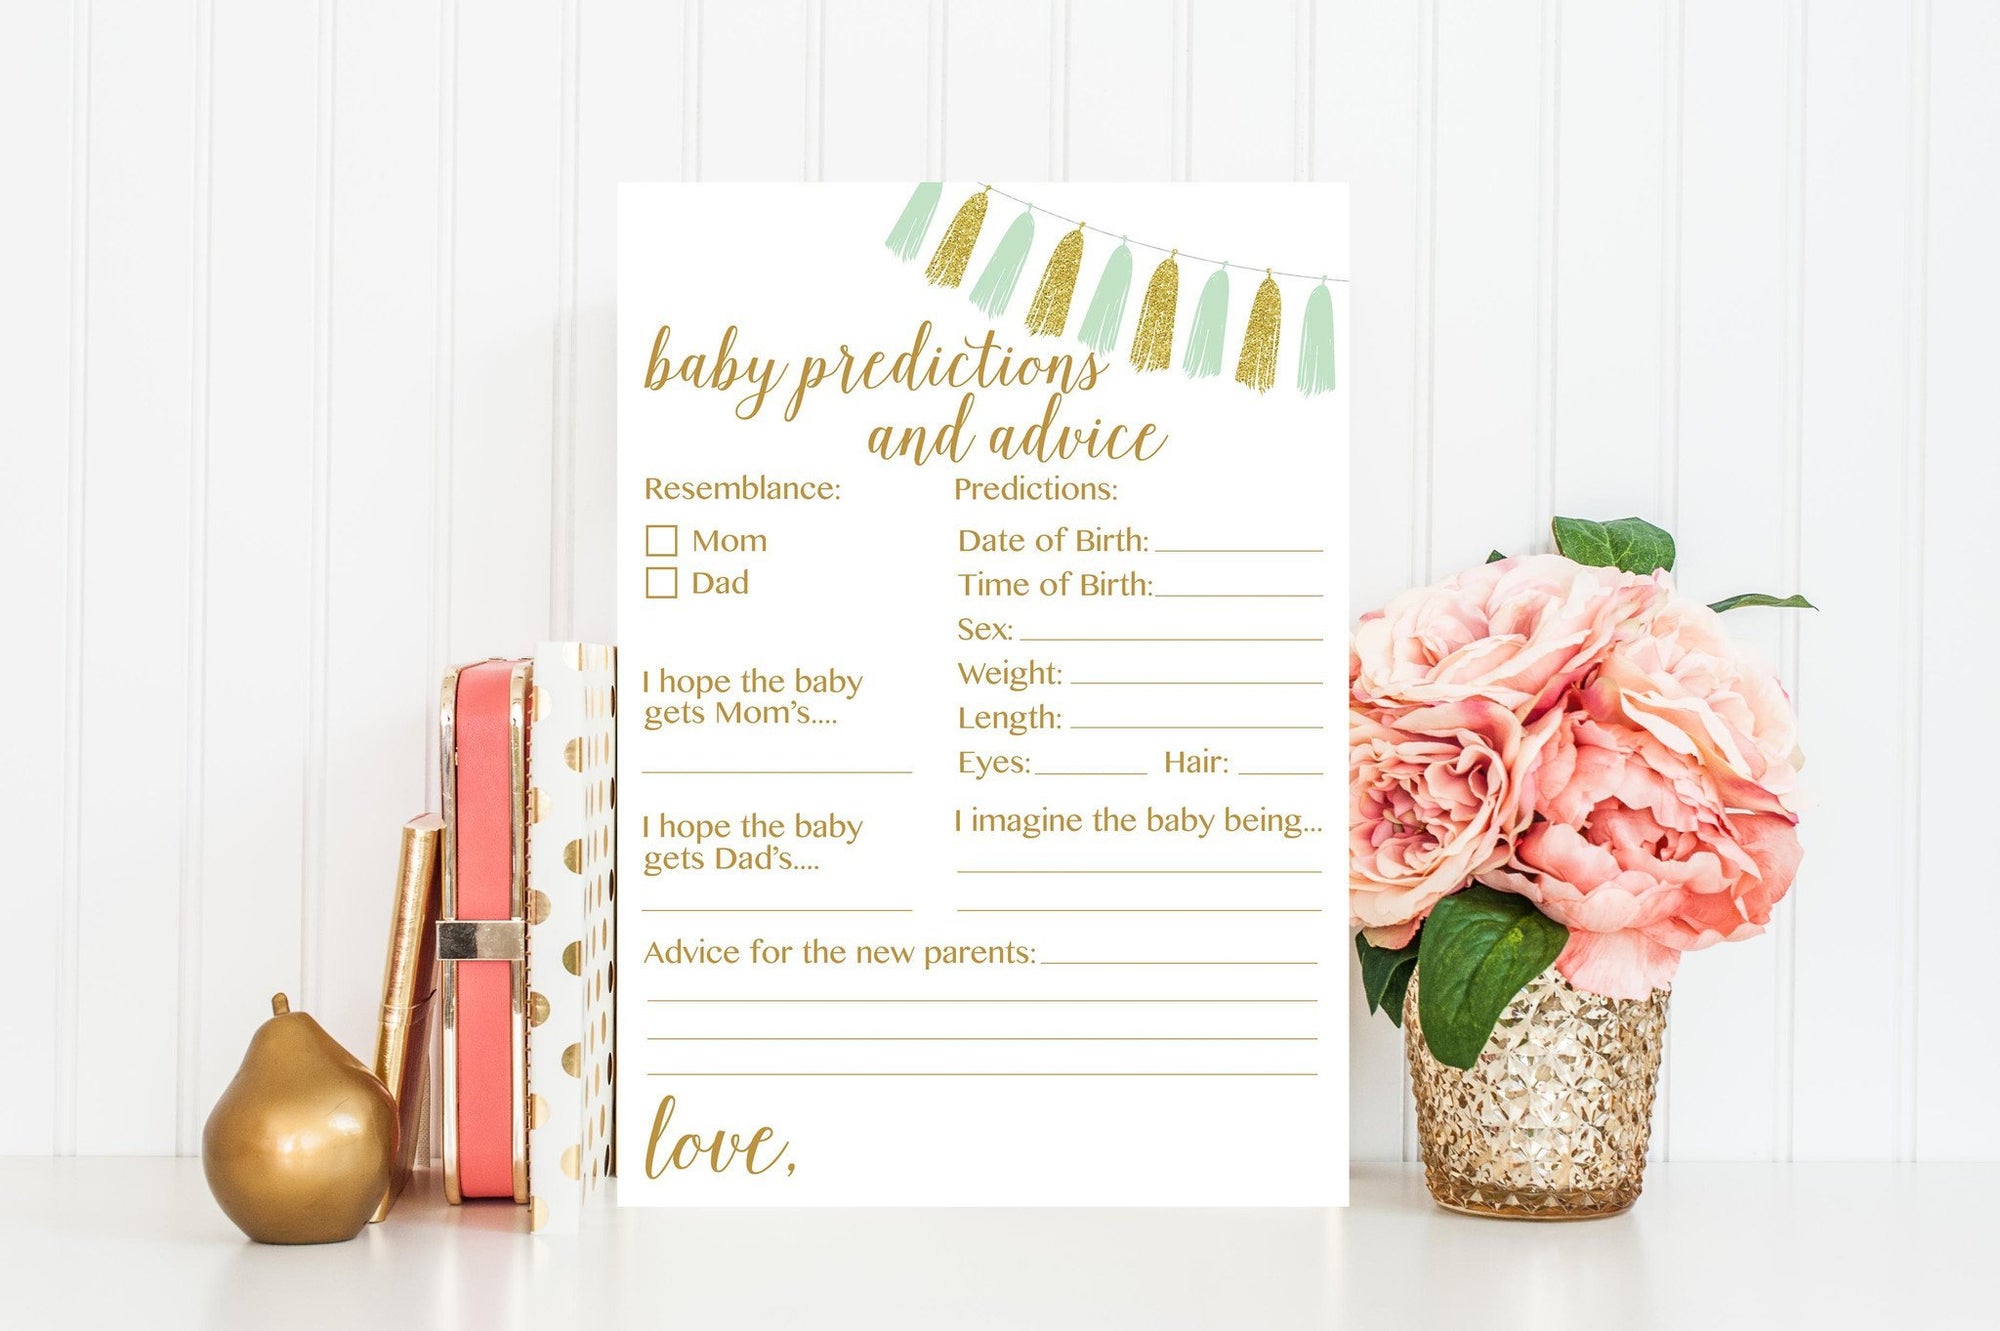 Baby Predictions and Advice - Mint & Gold Tassel Printable - Pretty Collected